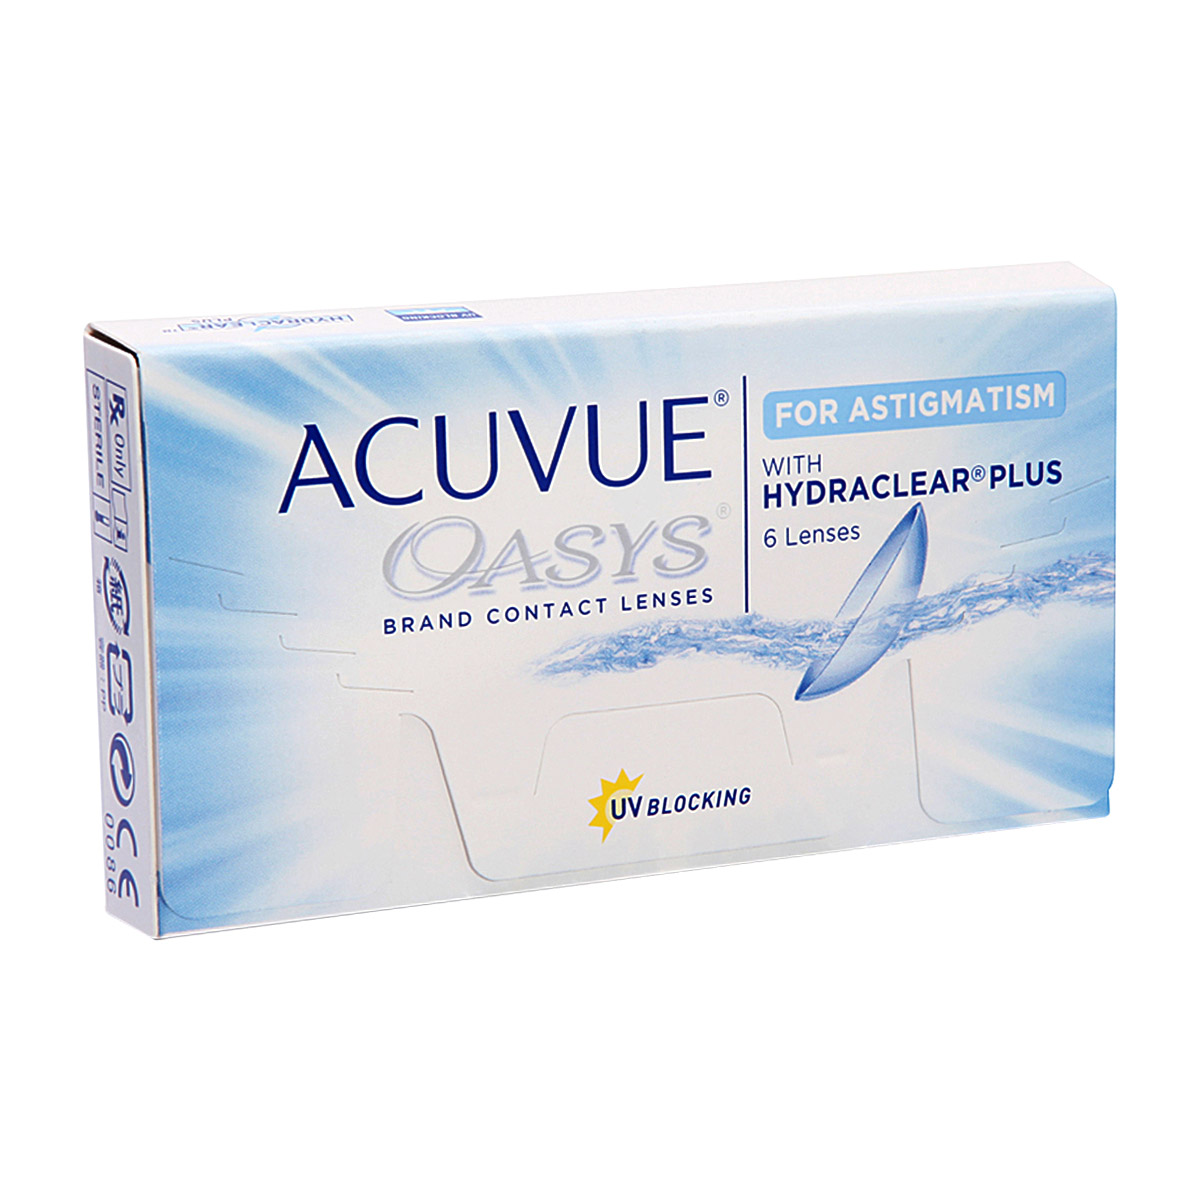 Image of Acuvue Oasys for Astigmatism 6 lenses